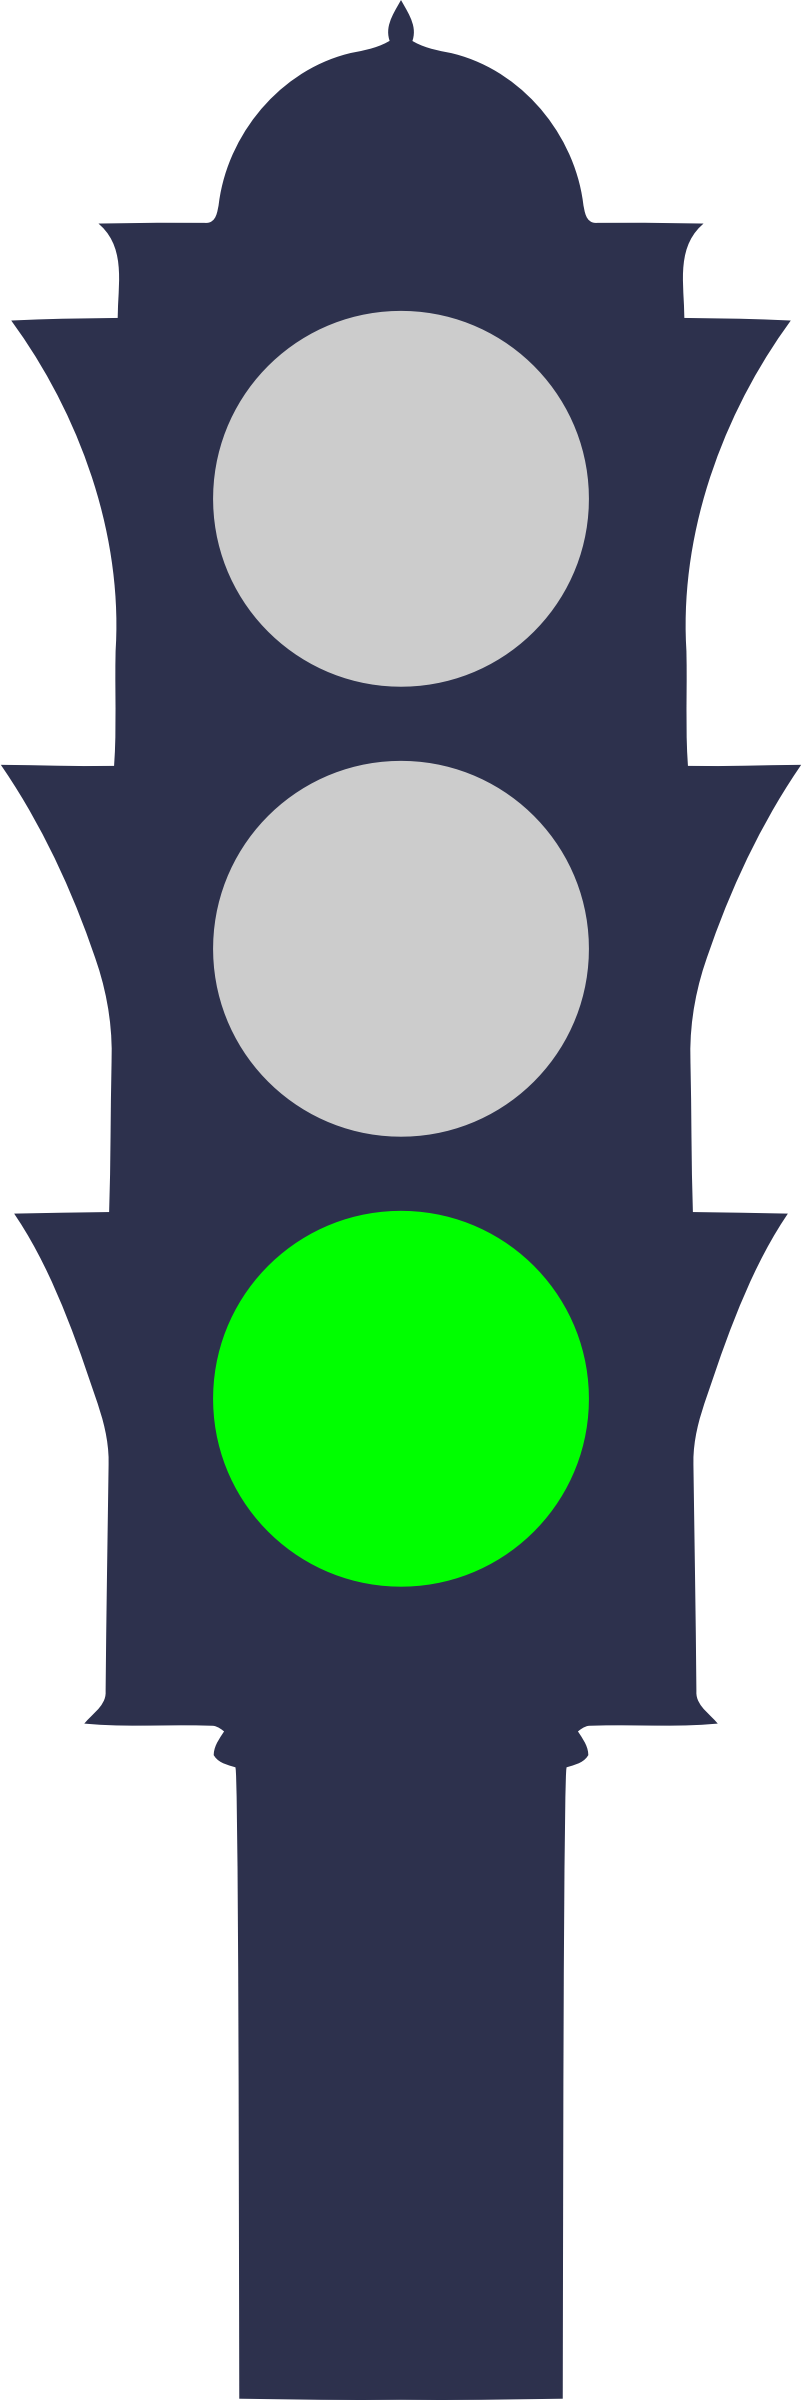 Affordable Clipart Traffic Light Green For Indicator - Affordable Clipart Traffic Light Green For Indicator (802x2400)